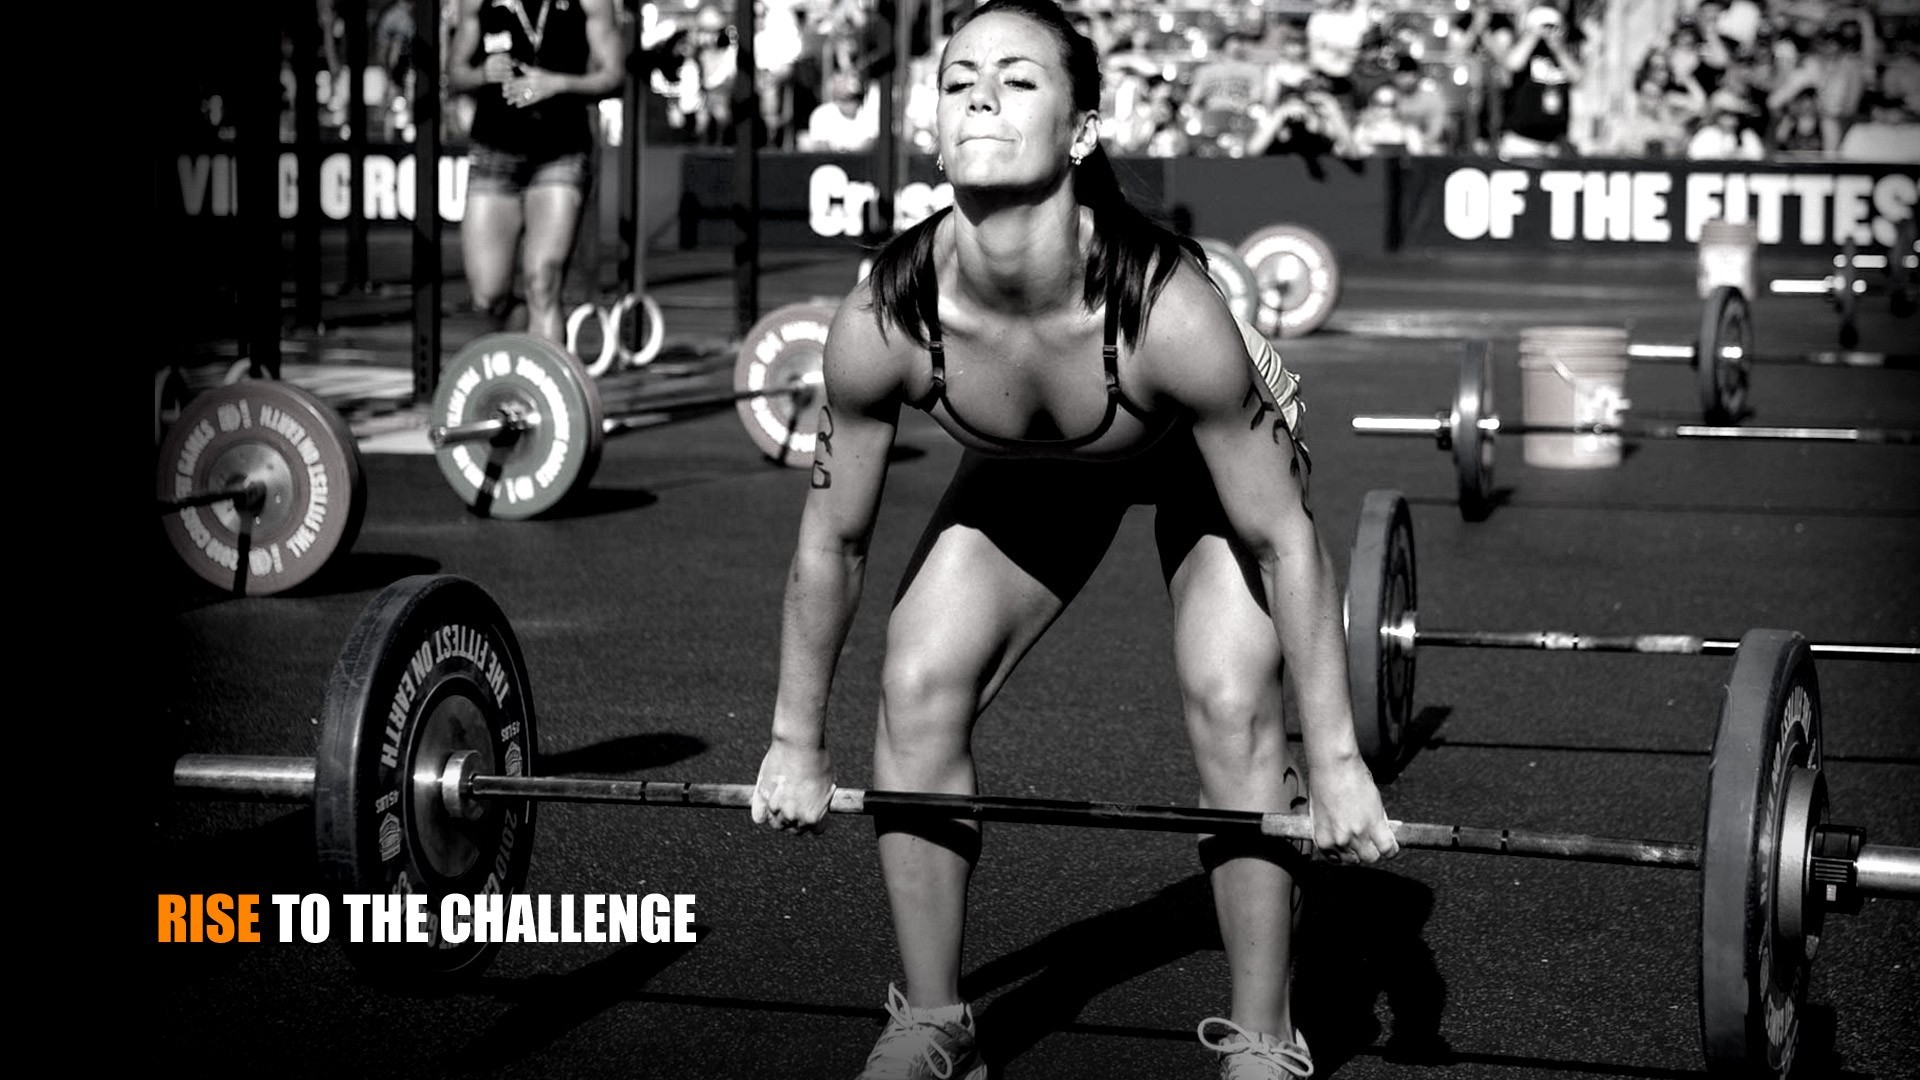 1920x1080 Wallpaper : room, skinny, exercising, CrossFit, bodybuilding, structure,  barbell, Camille Leblanc, muscle, arm, chest, black and white, ...